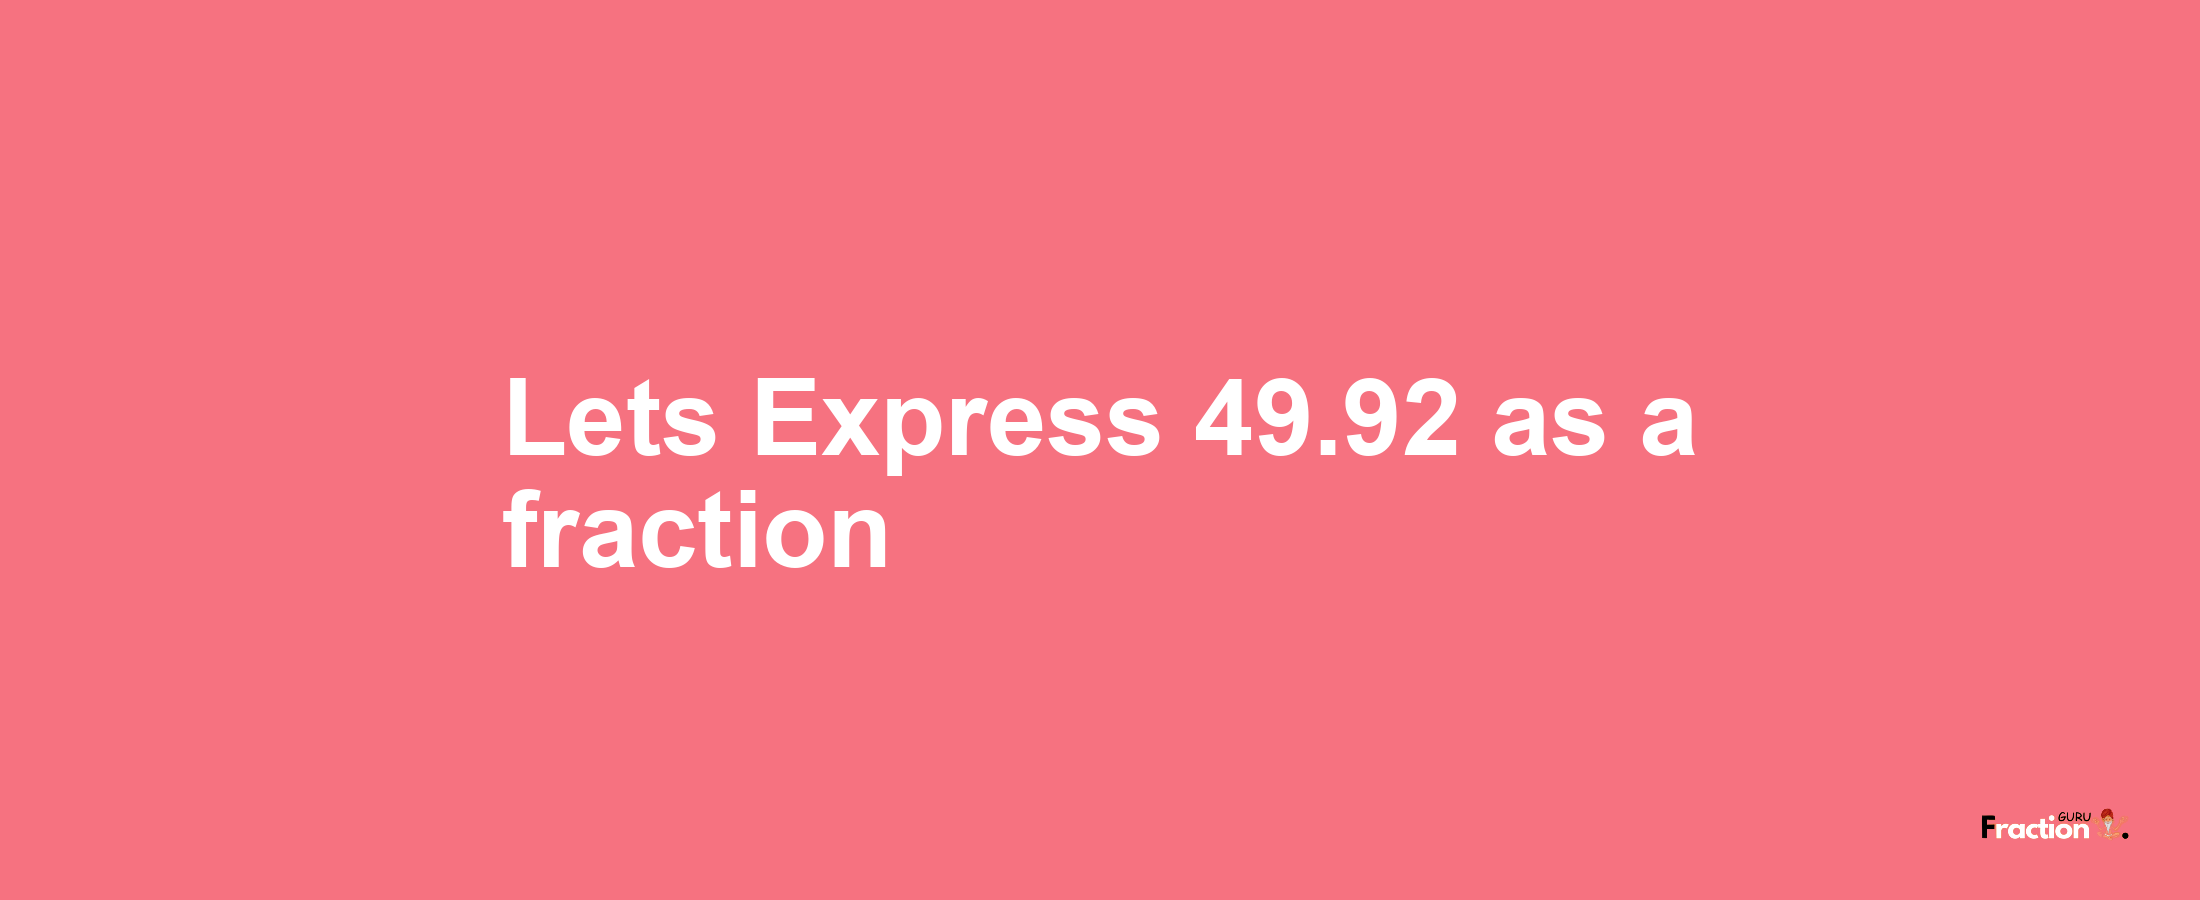 Lets Express 49.92 as afraction